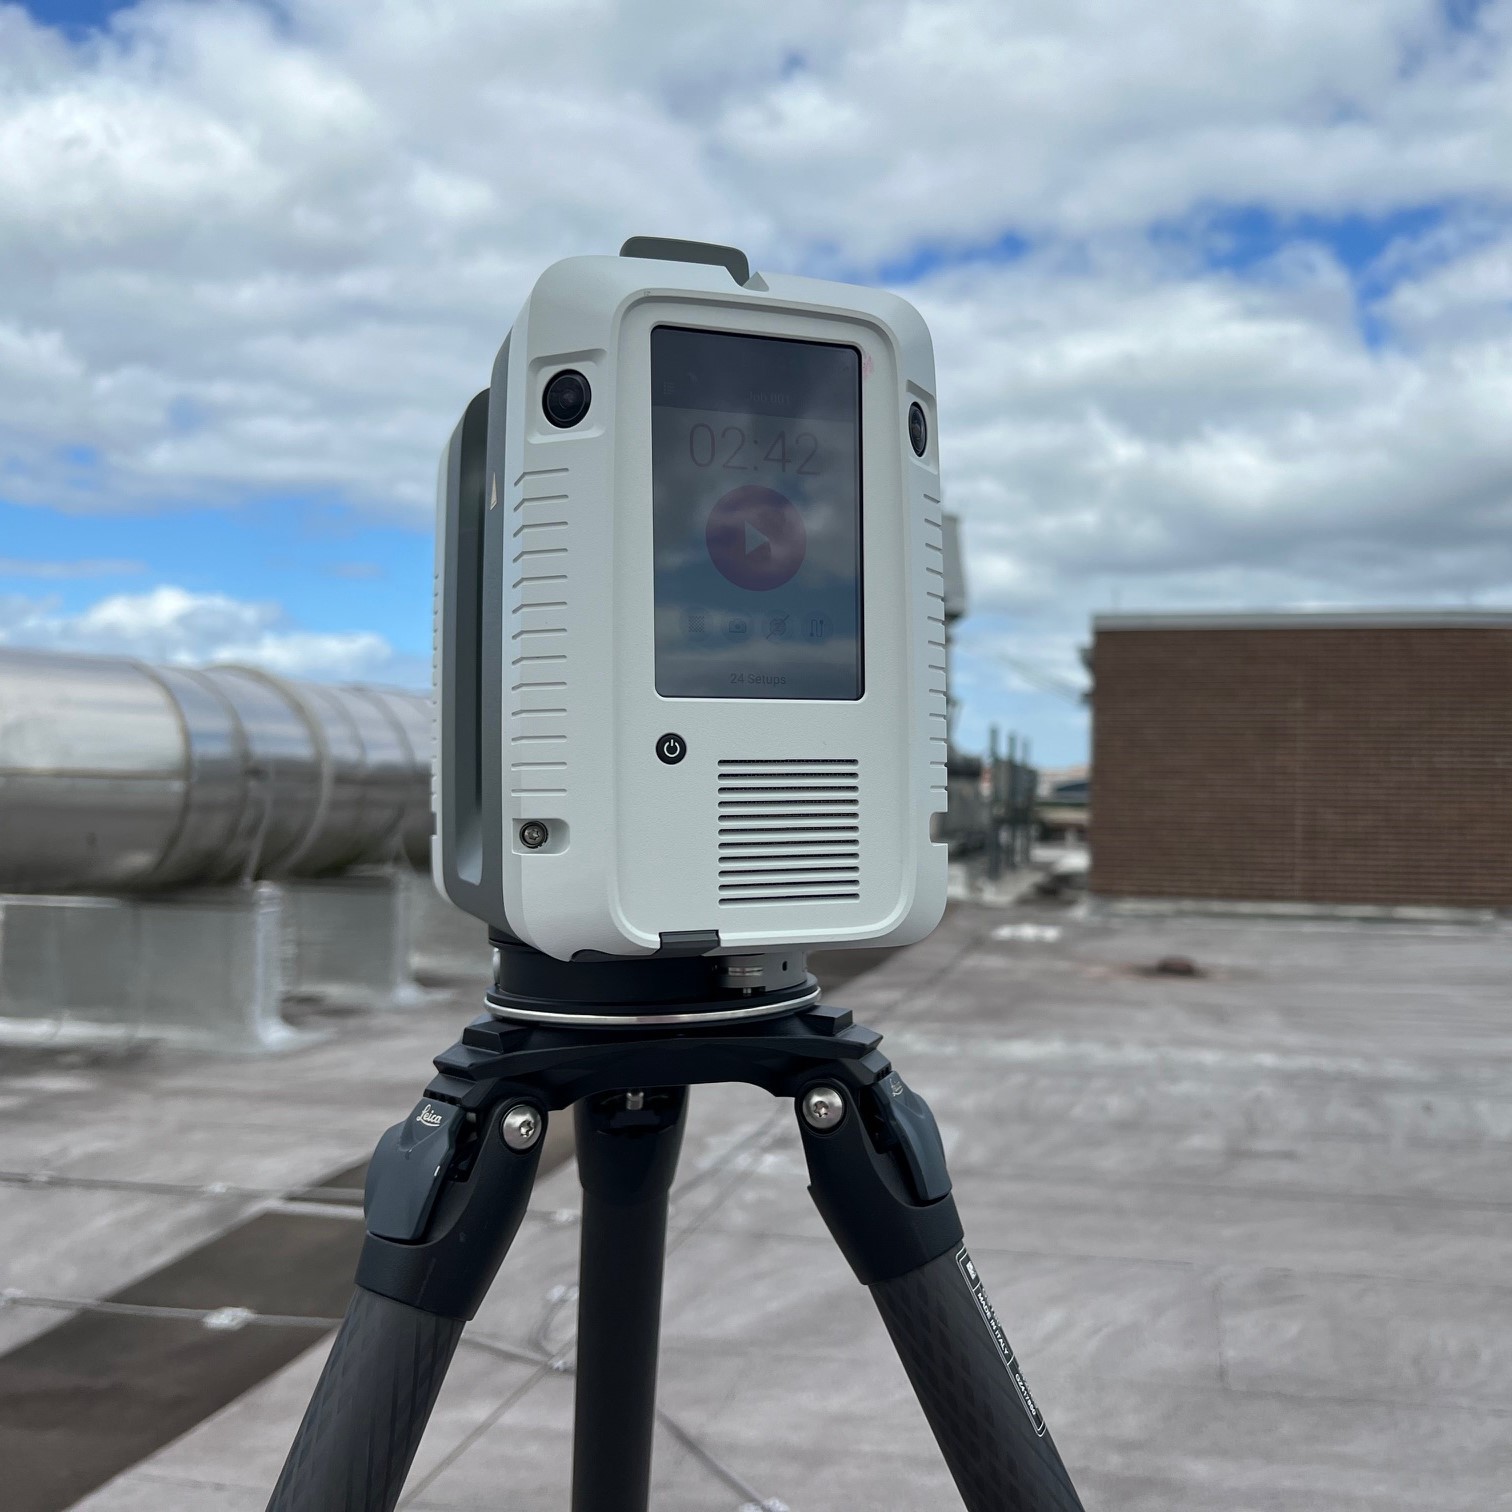 Leica RTC 360 on Research 1 Roof